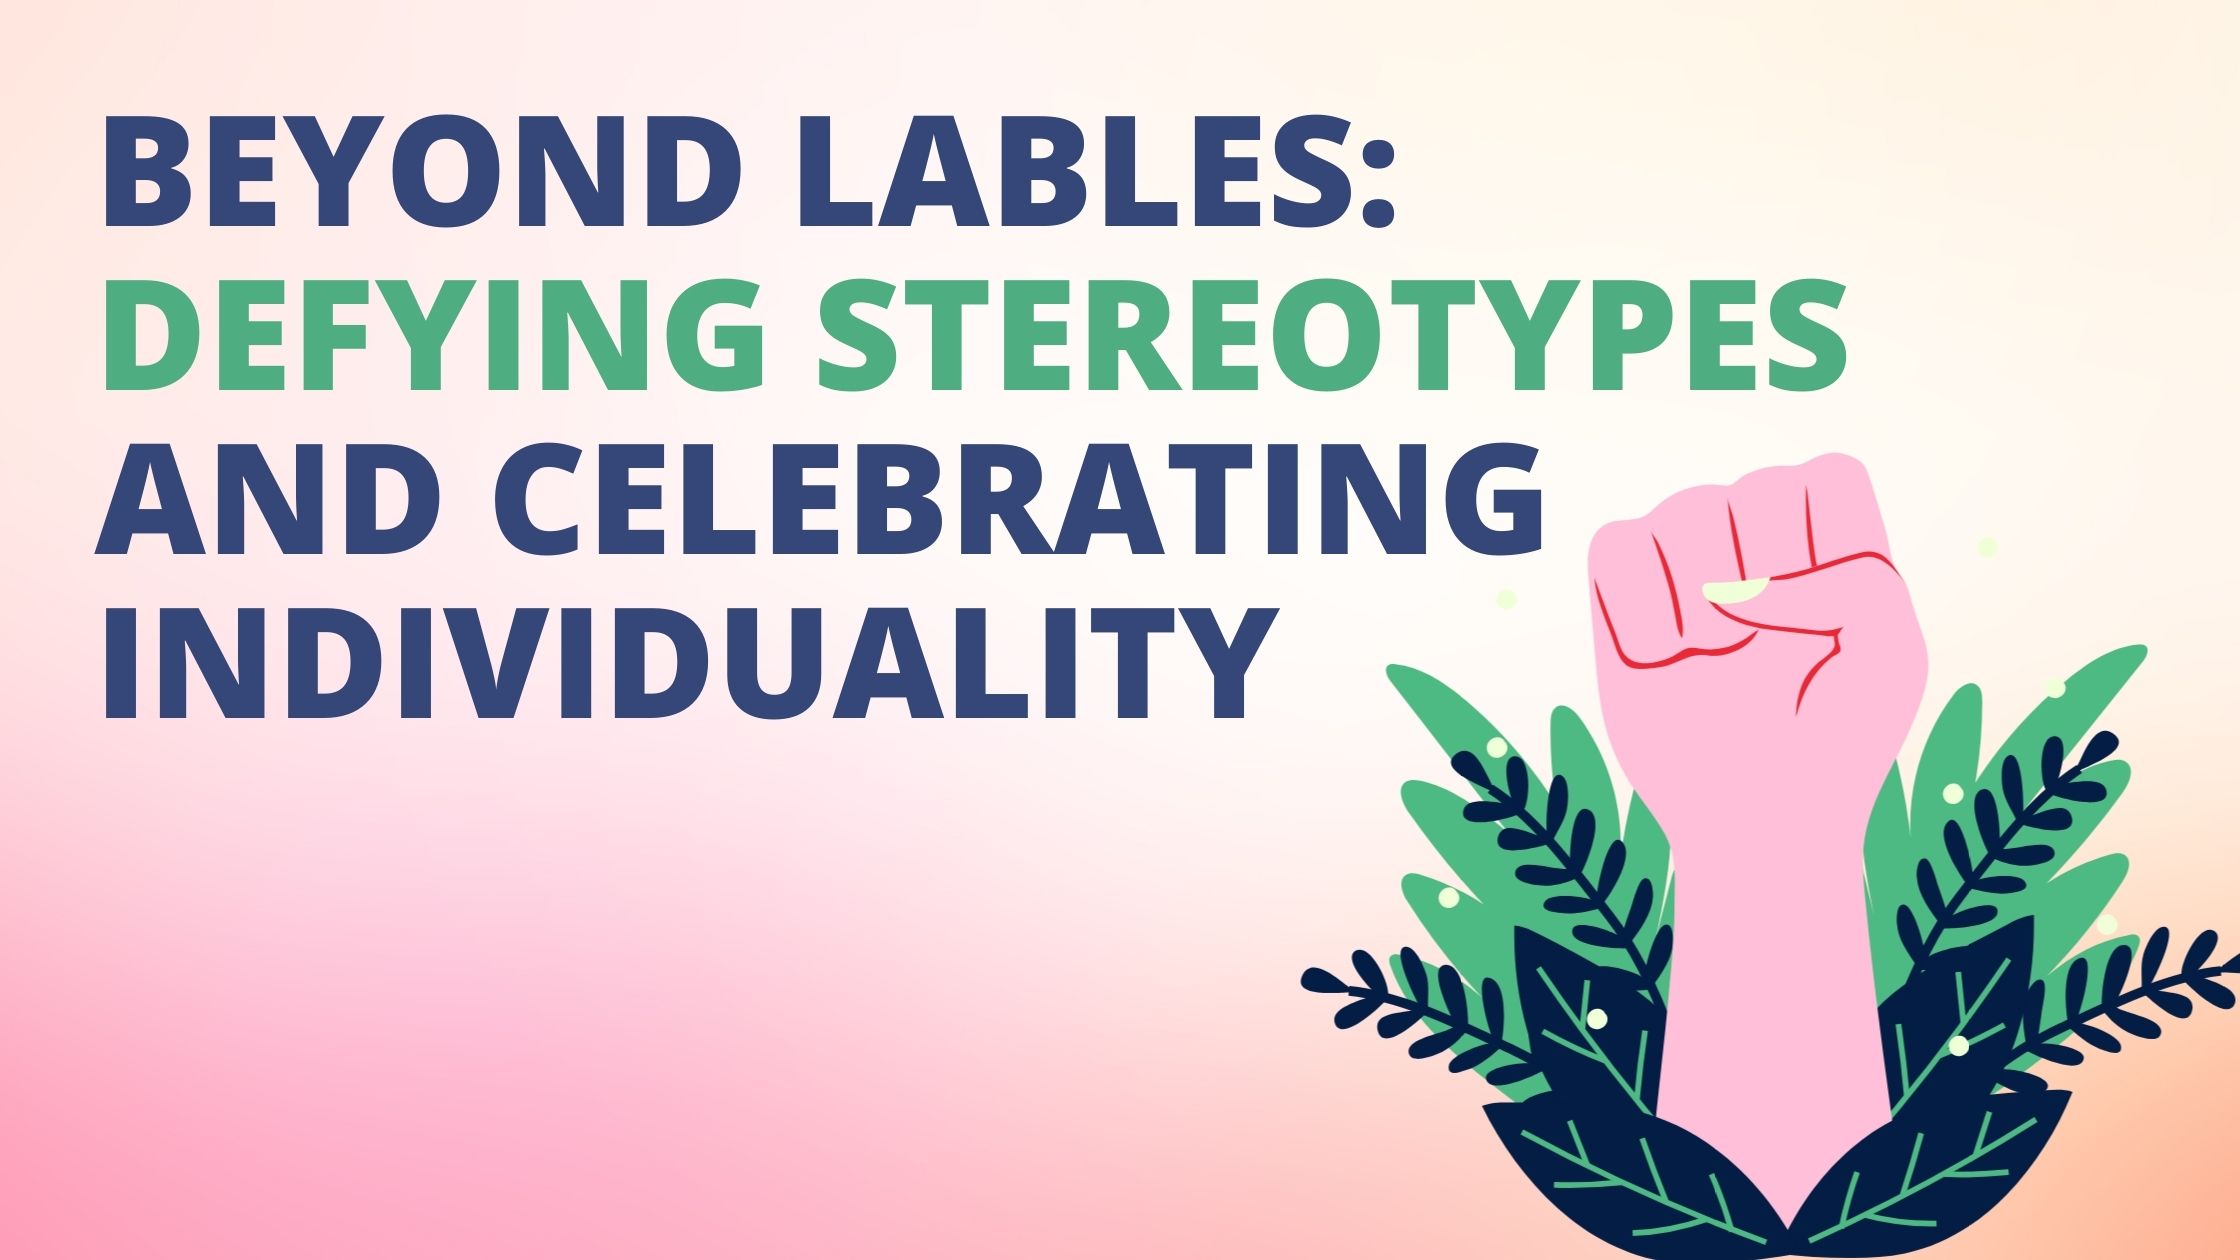 Beyond lables: Defying stereotypes and celebrating individuality